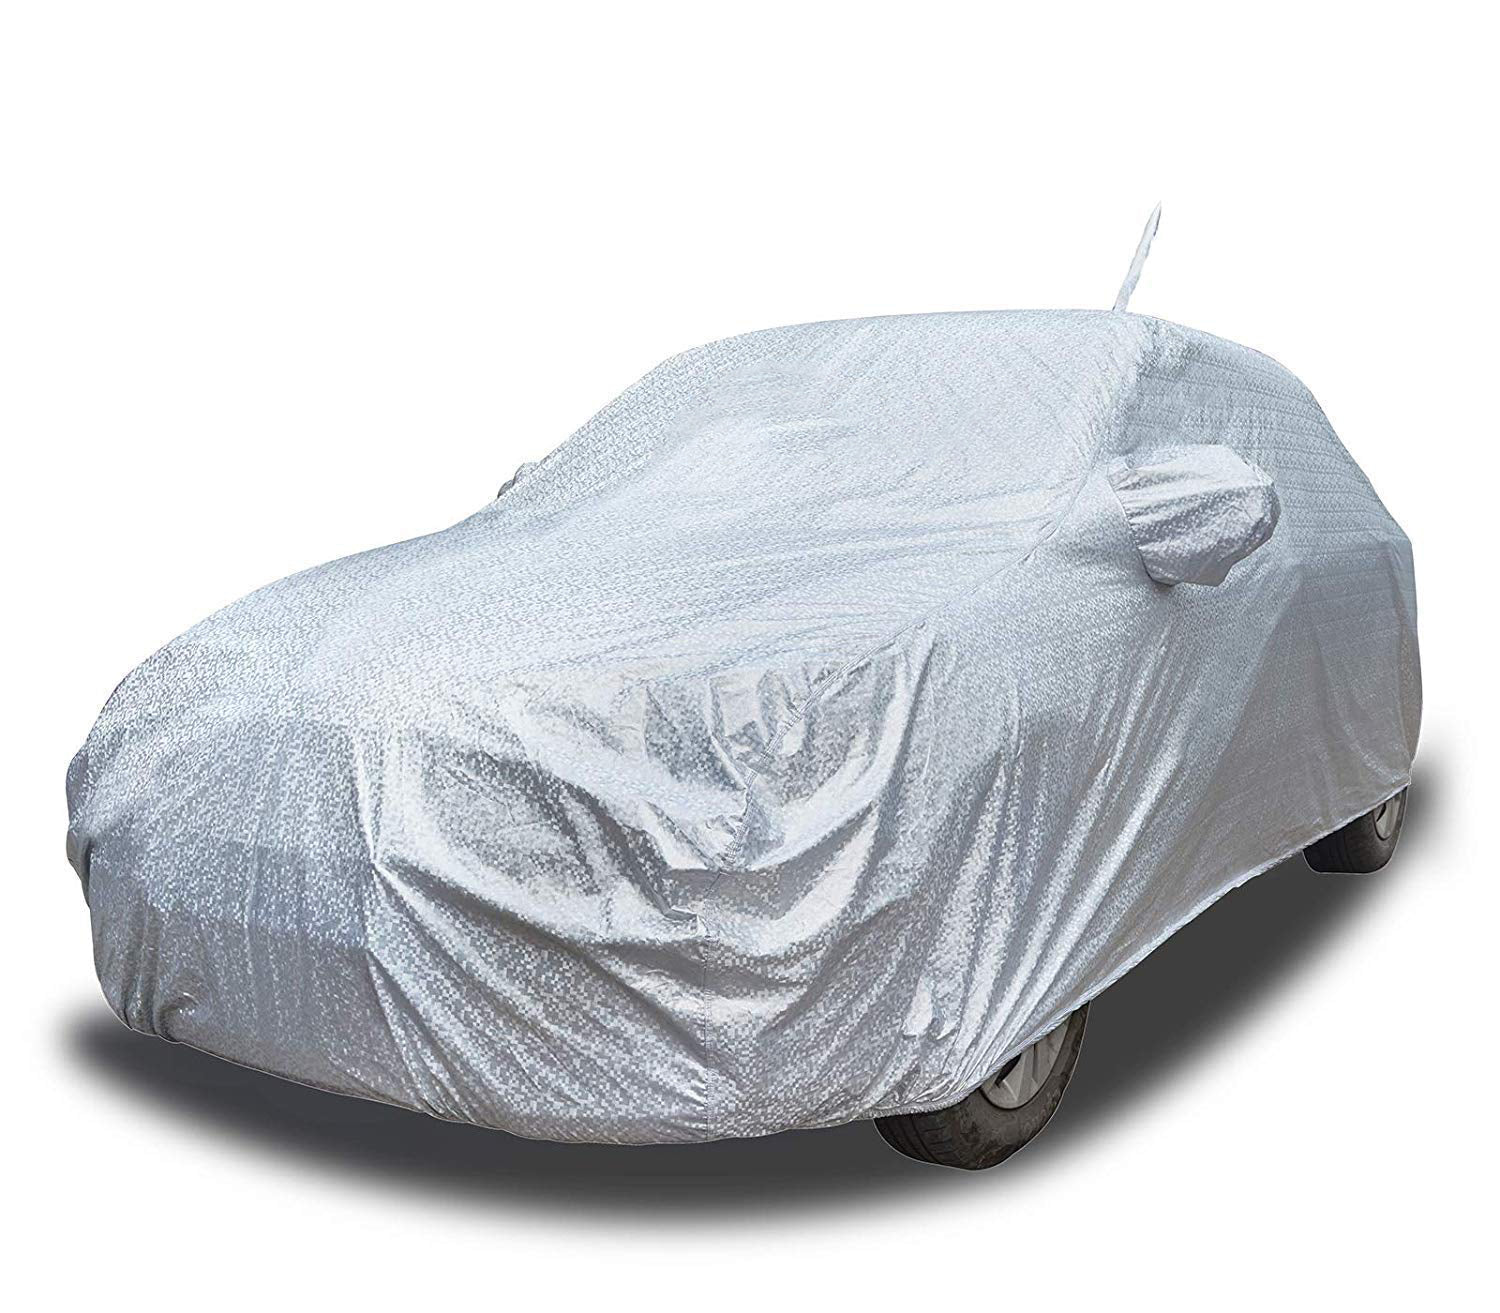 Tata Tigor Waterproof Car Cover, All Weather Resistant, Triple Stitched  with Soft Cotton Lining, Side Mirror & Antenna Pocket (AERO Silver)